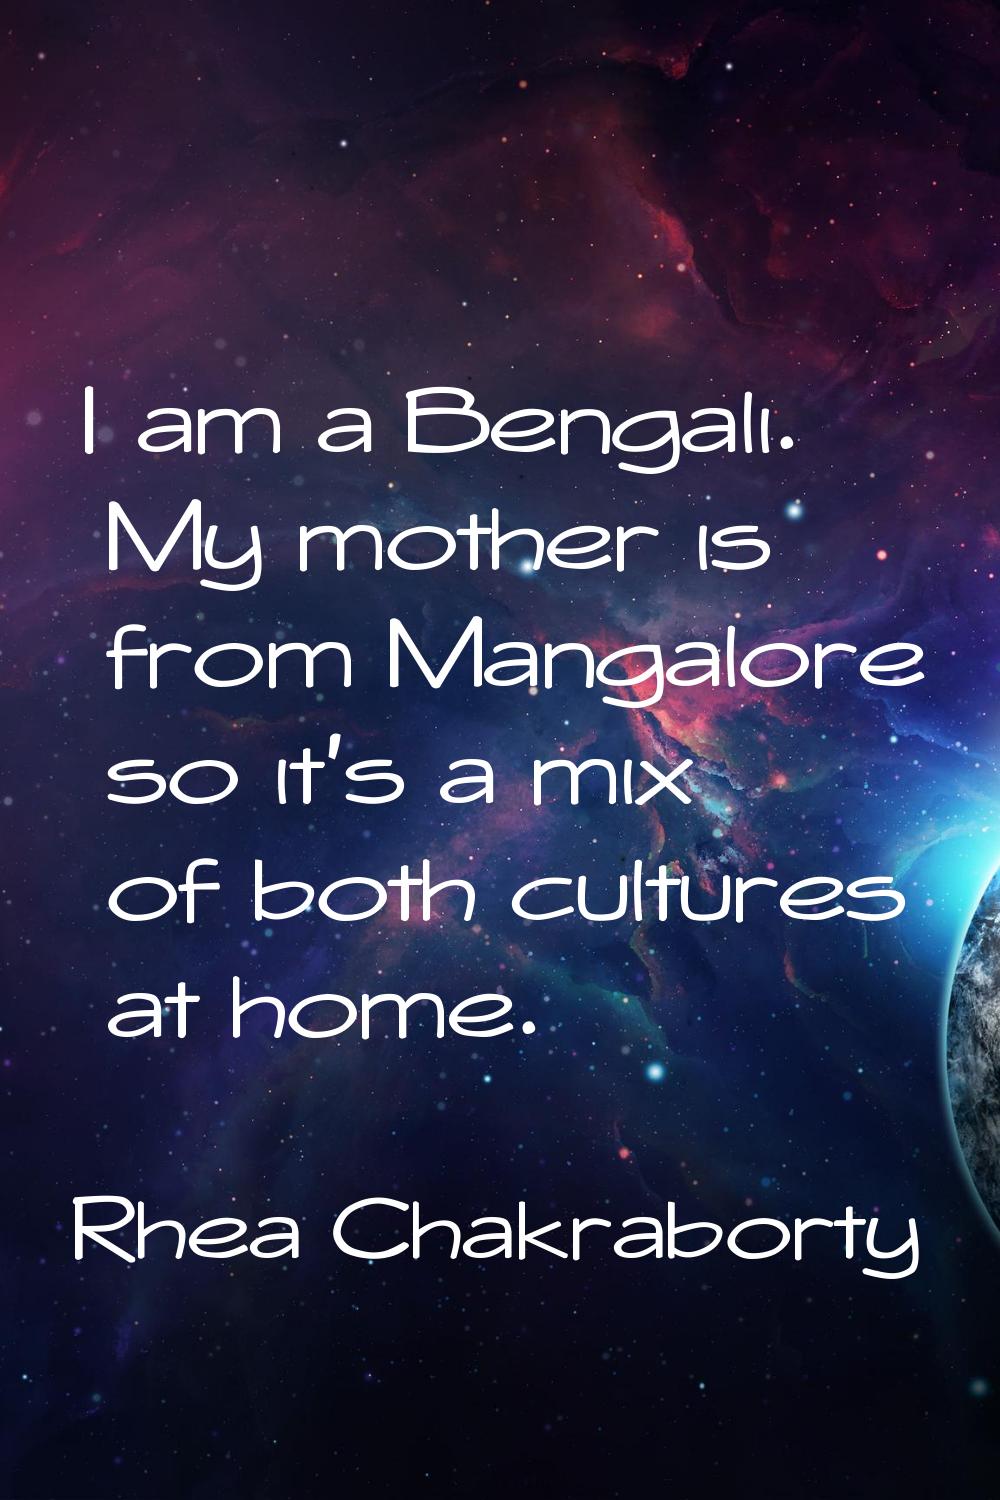 I am a Bengali. My mother is from Mangalore so it's a mix of both cultures at home.